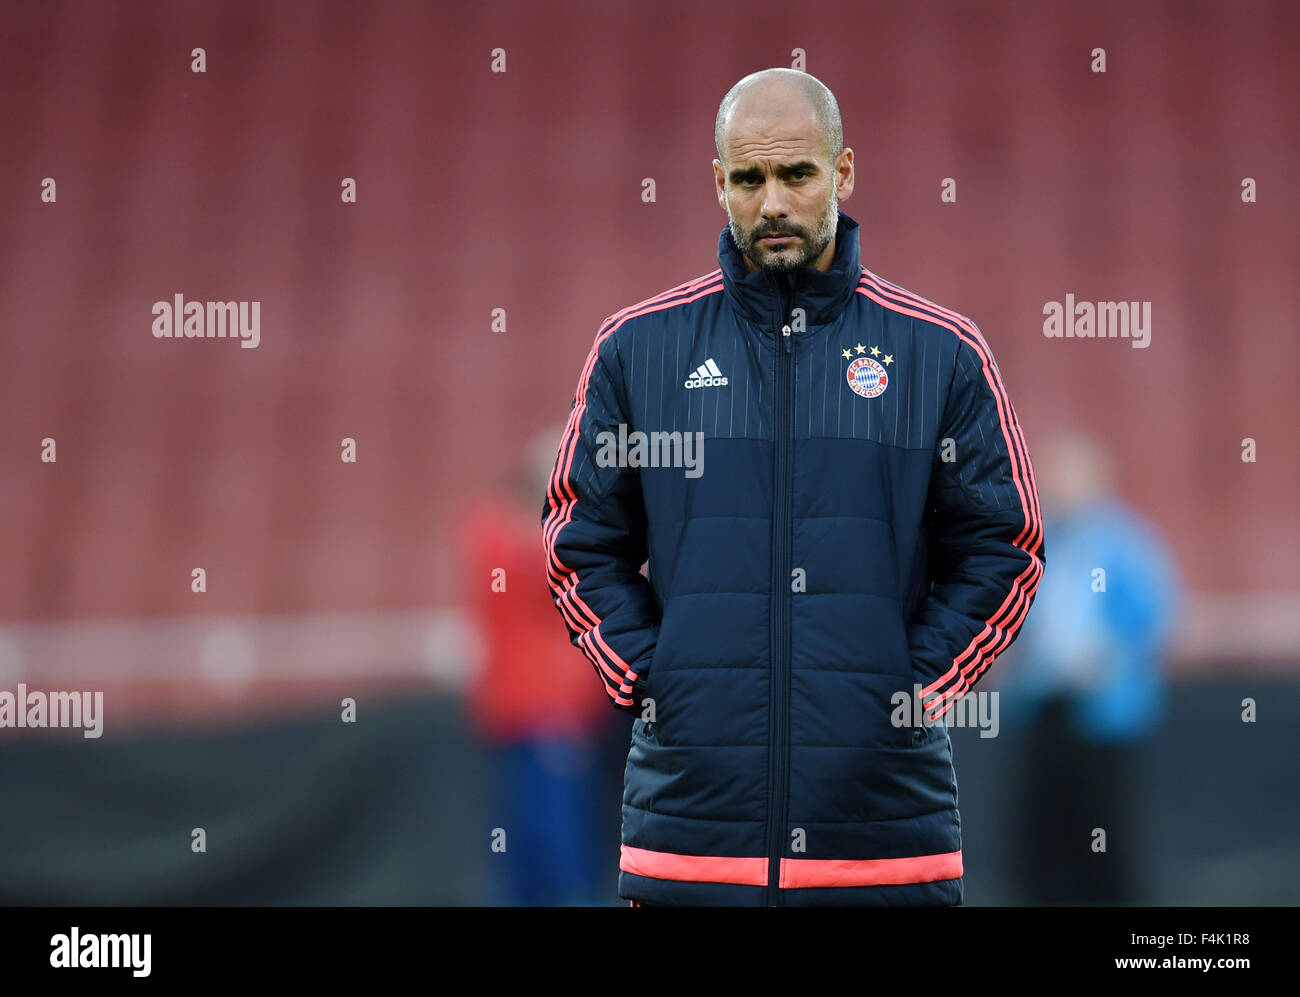 London, UK. 19th Oct, 2015. Bayern Munich coach Pep Guardiola at a training  session at the Emirates Stadium in London, UK, 19 October 2015. Bayern  Munich play Arsenal in the group stage